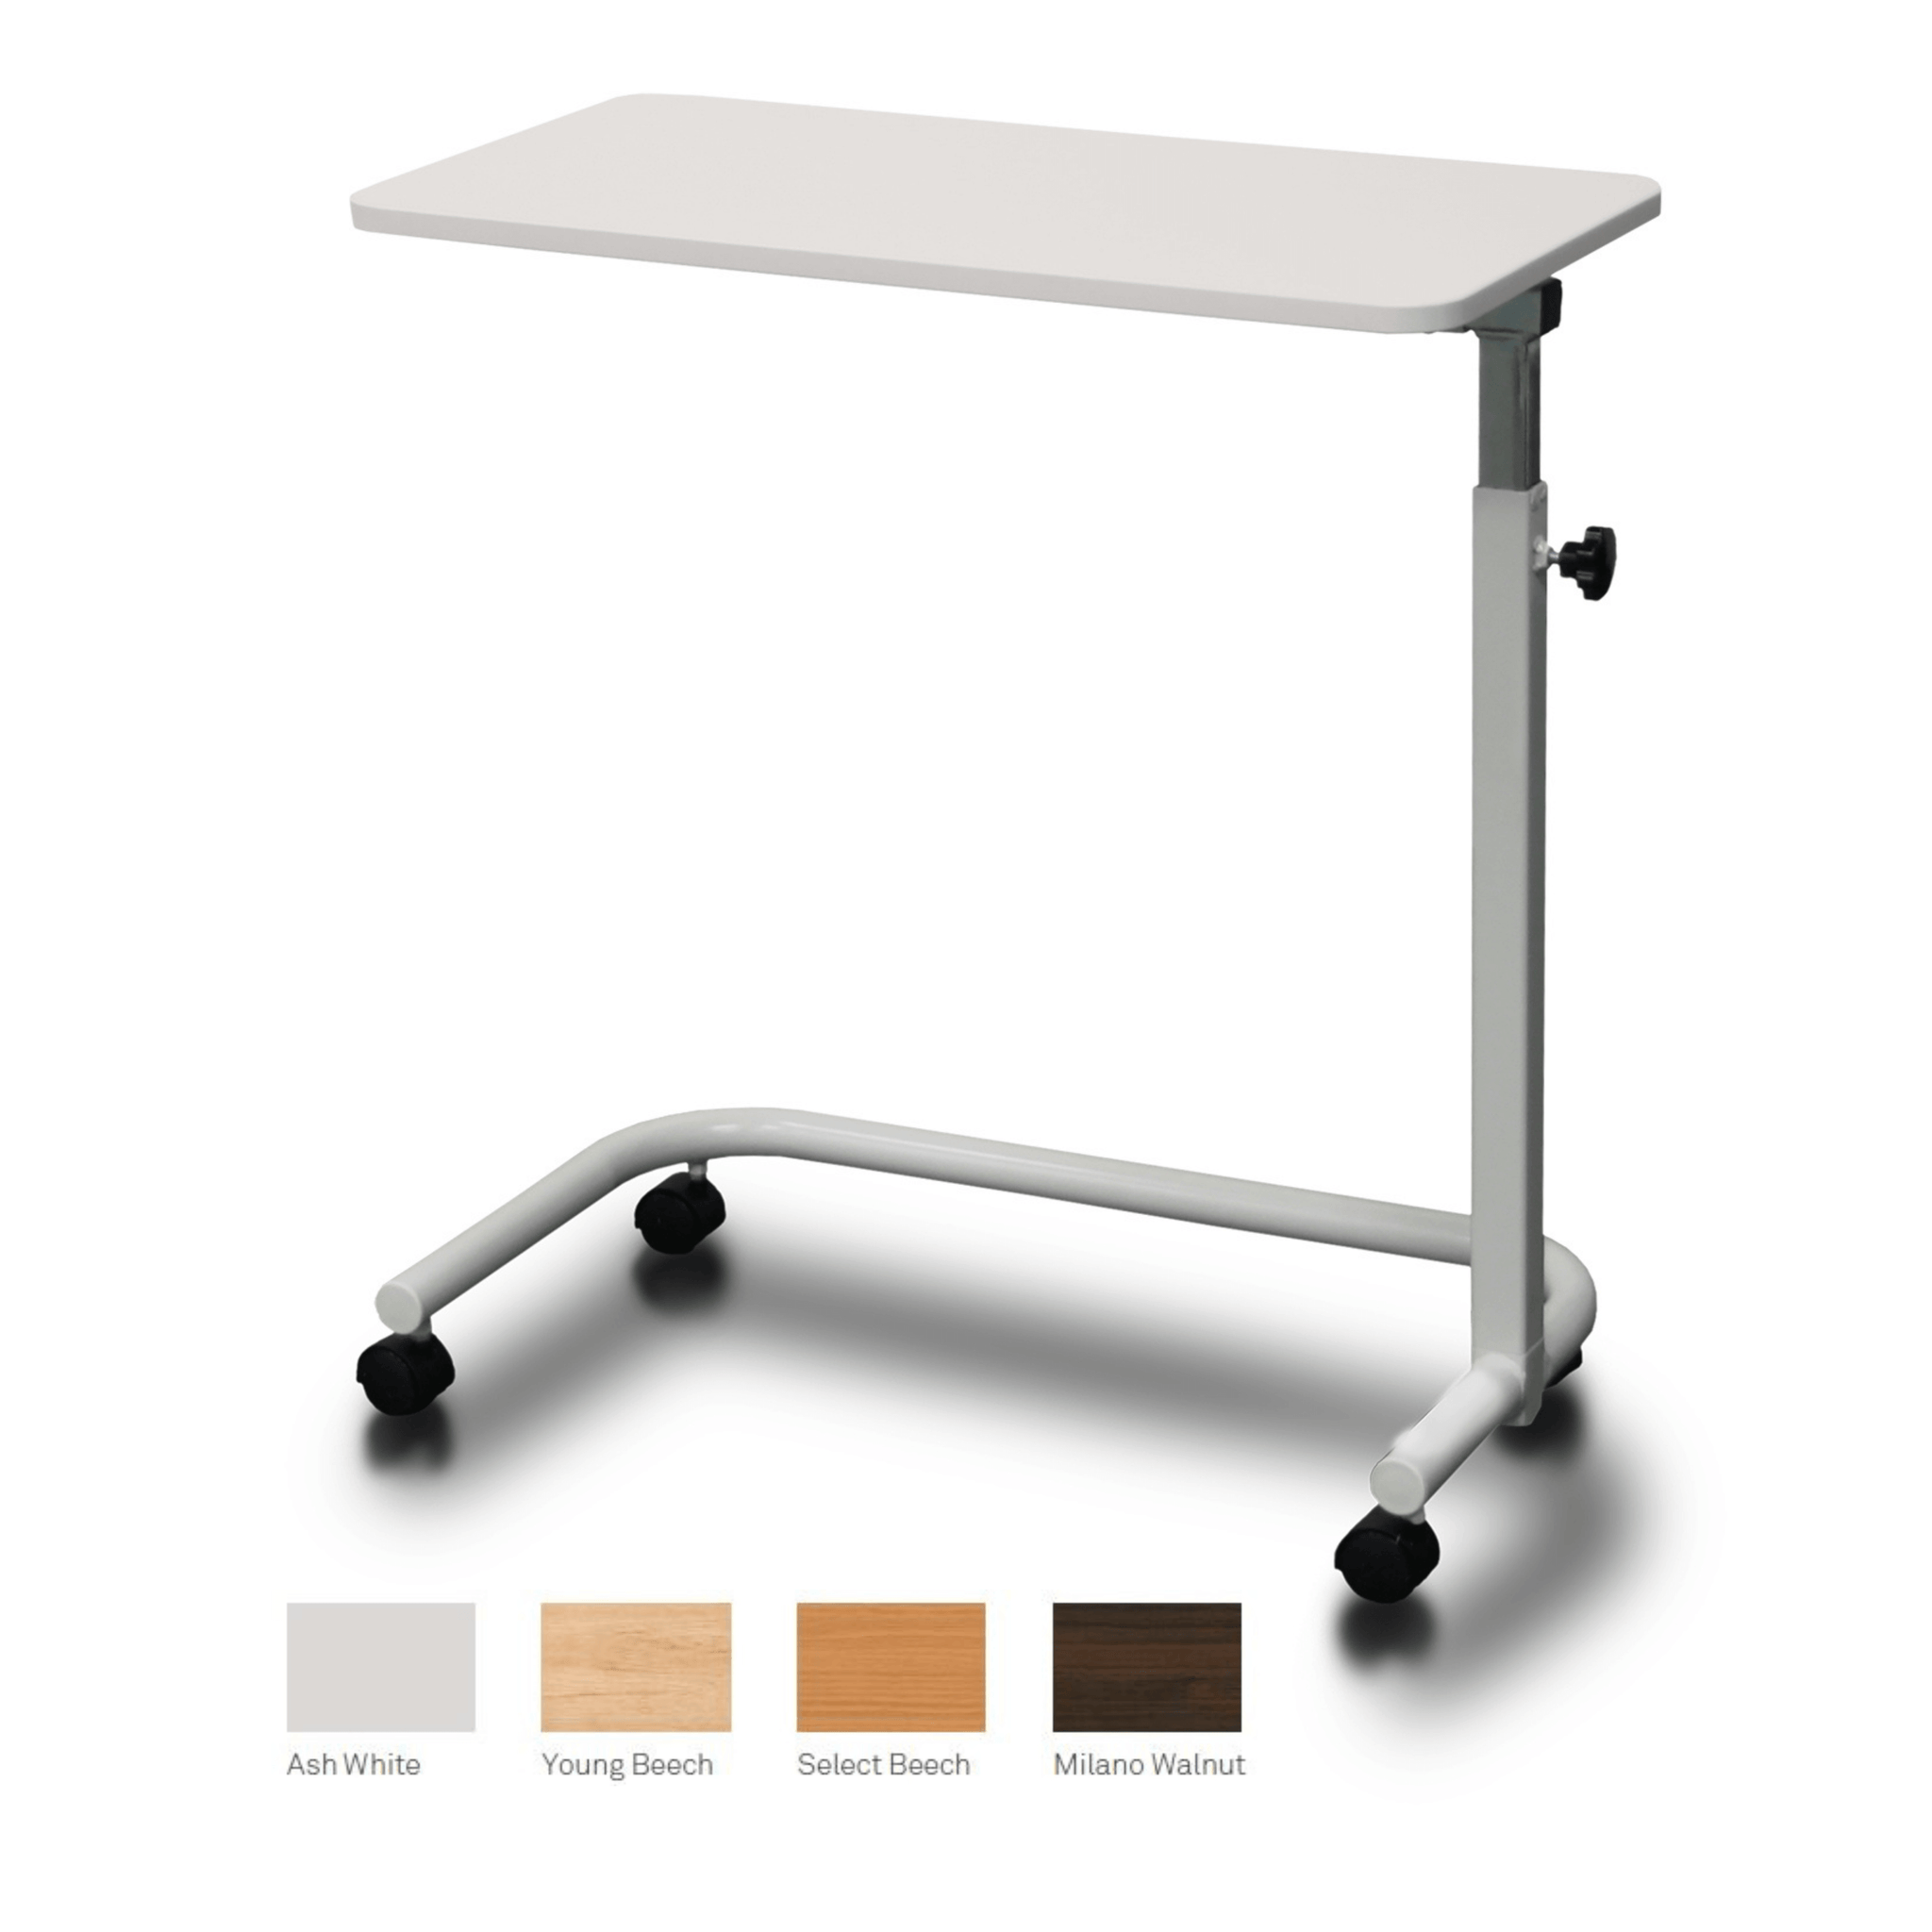 Fixed Top Overbed Table - Manual Height Adjustment, Milano Walnut